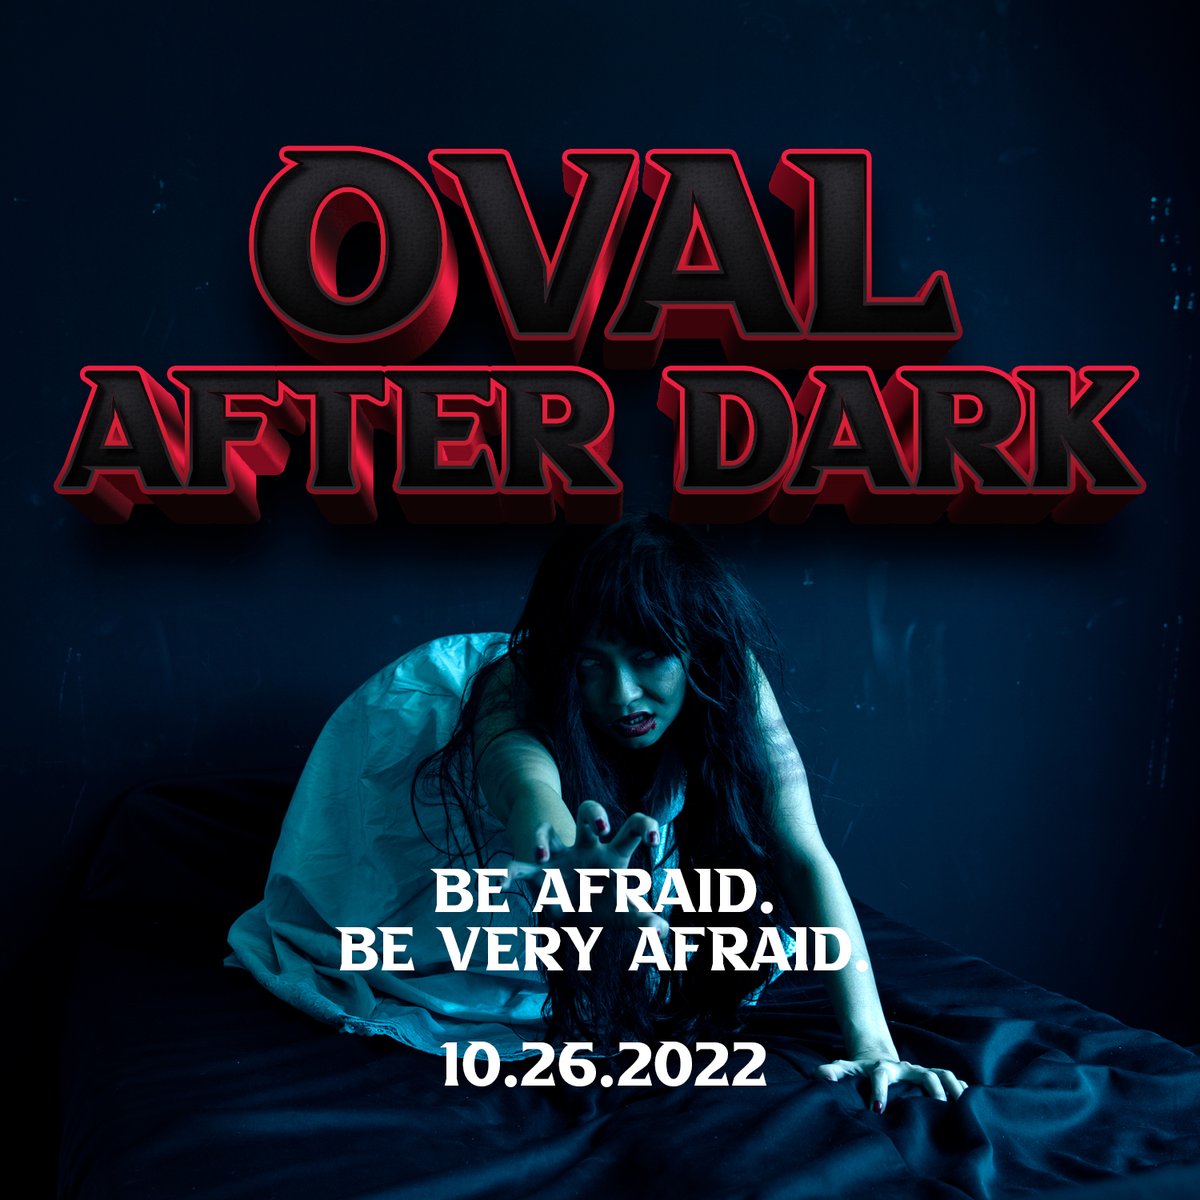 OVAL AFTER DARK Date: Oct. 26, 2022 Haunting: 8:30 p.m. - 11:00 p.m. Entry: $5 All proceeds to benefit the OLYMPIC OVAL ATHLETE BURSARY FUND. Learn more: bit.ly/3MFmFi6